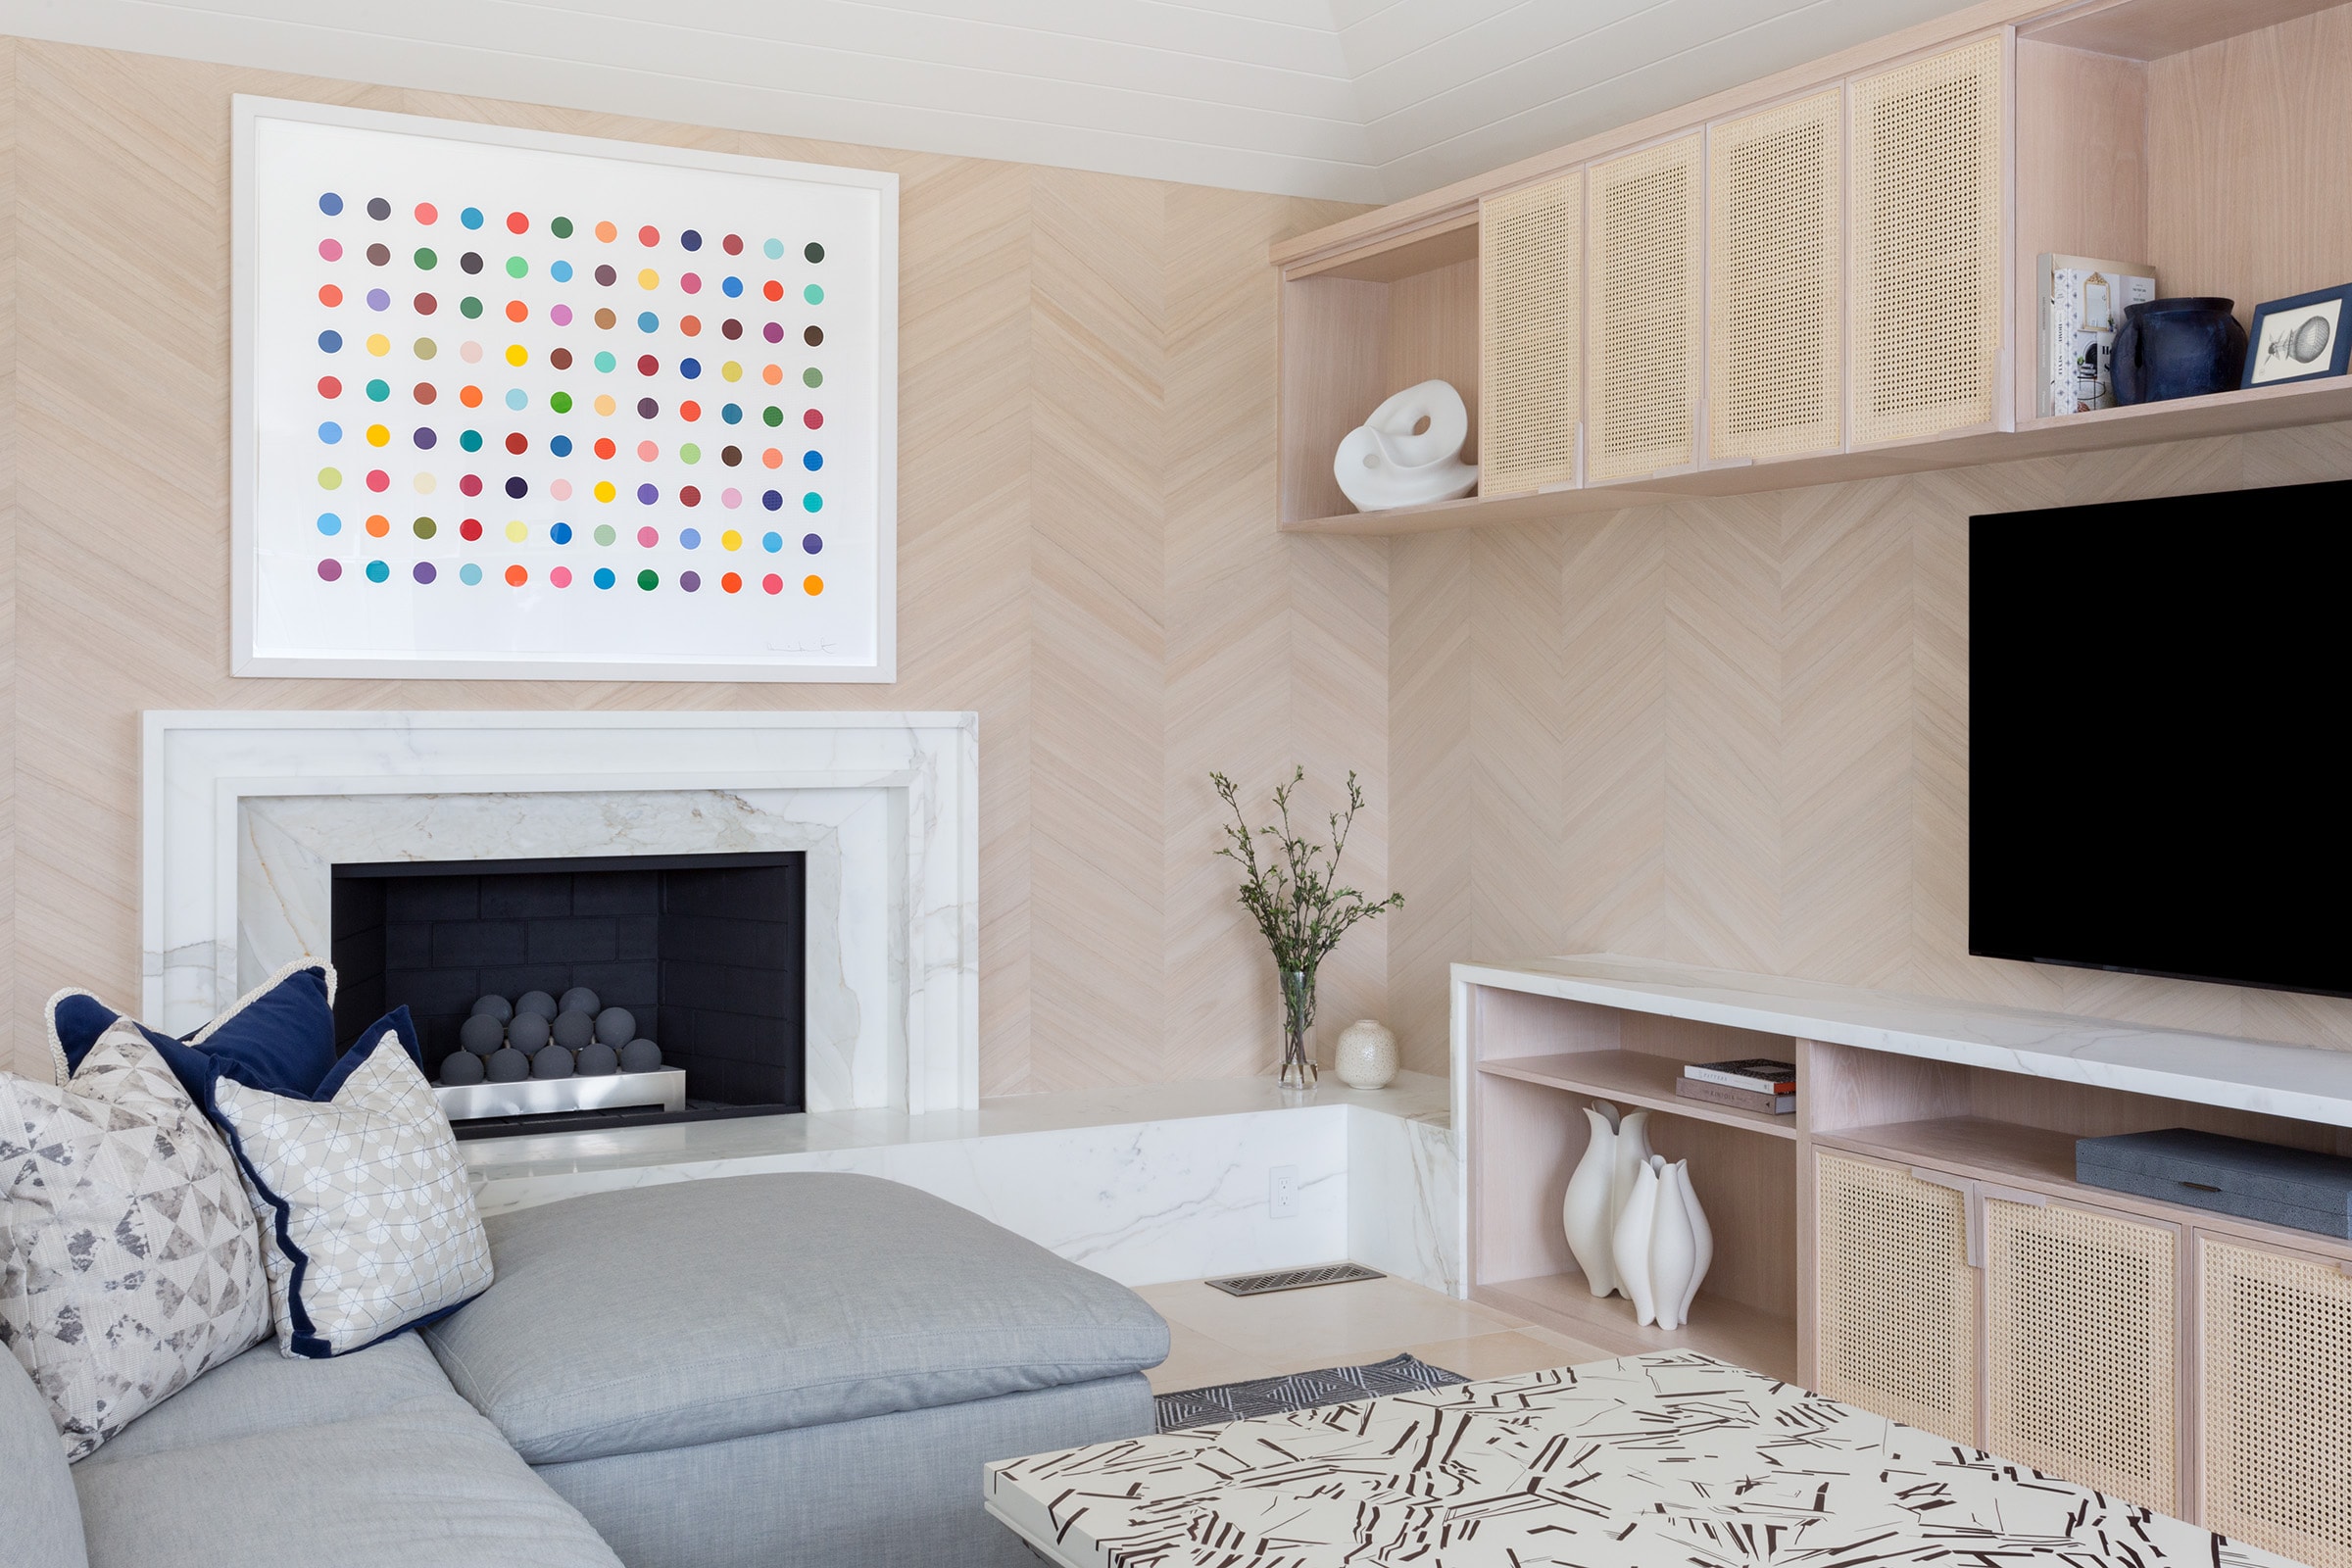 A Damien Hirst painting over a fireplace with custom millwork